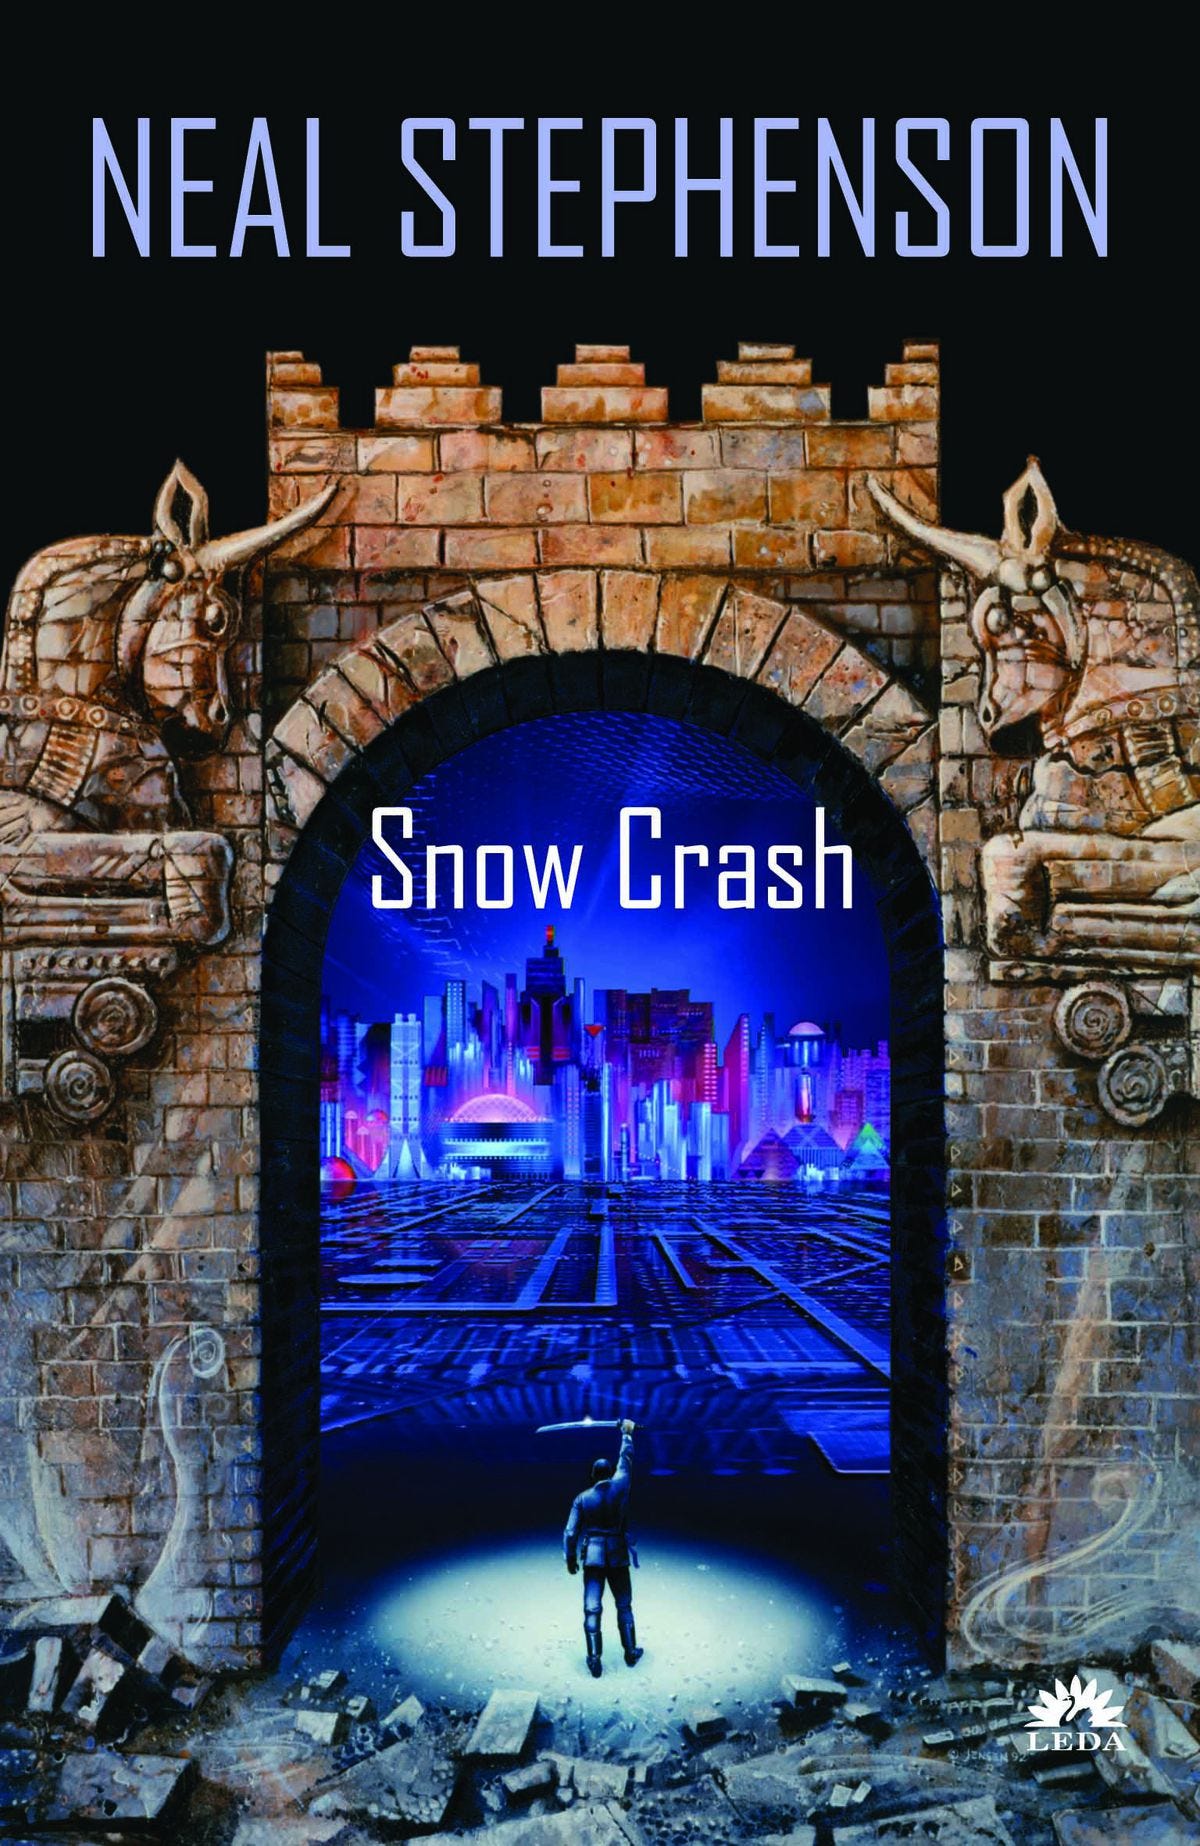 The paperback cover of Neal Stephenson’s Snow Crash